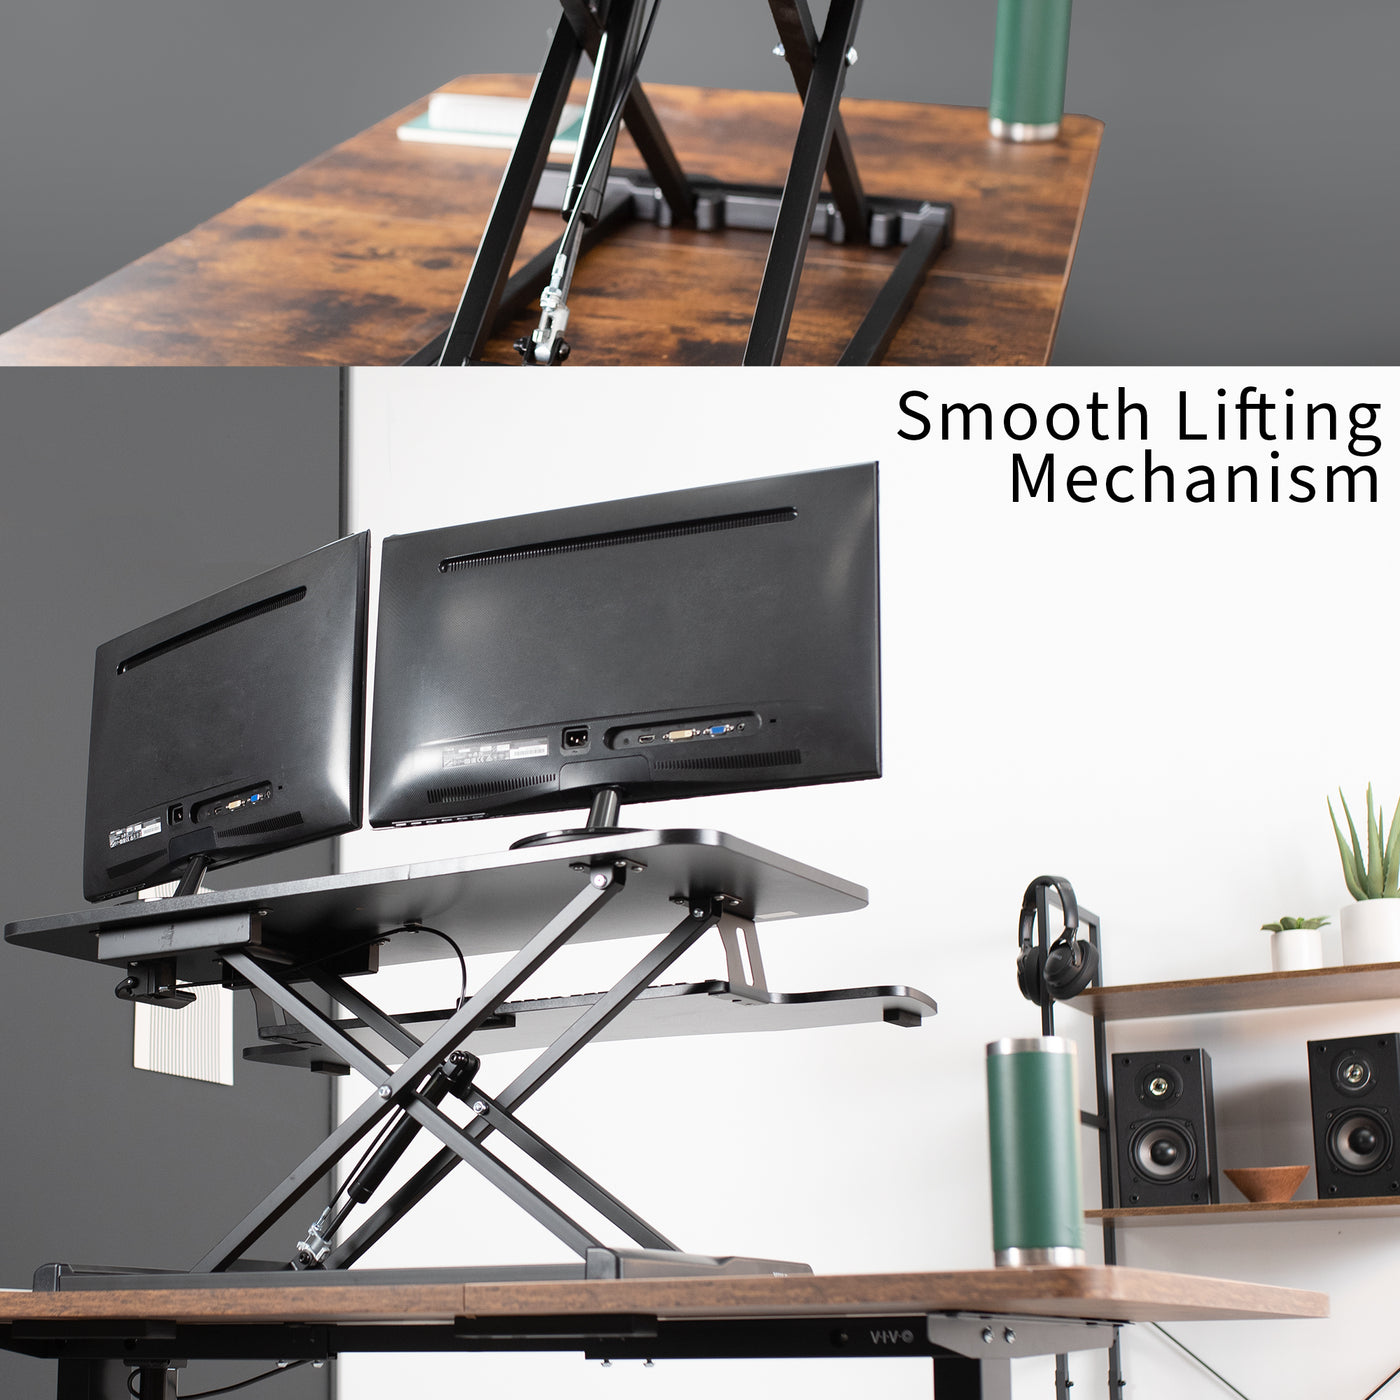 Smooth lifting mechanism to easily adjust from sitting to standing.